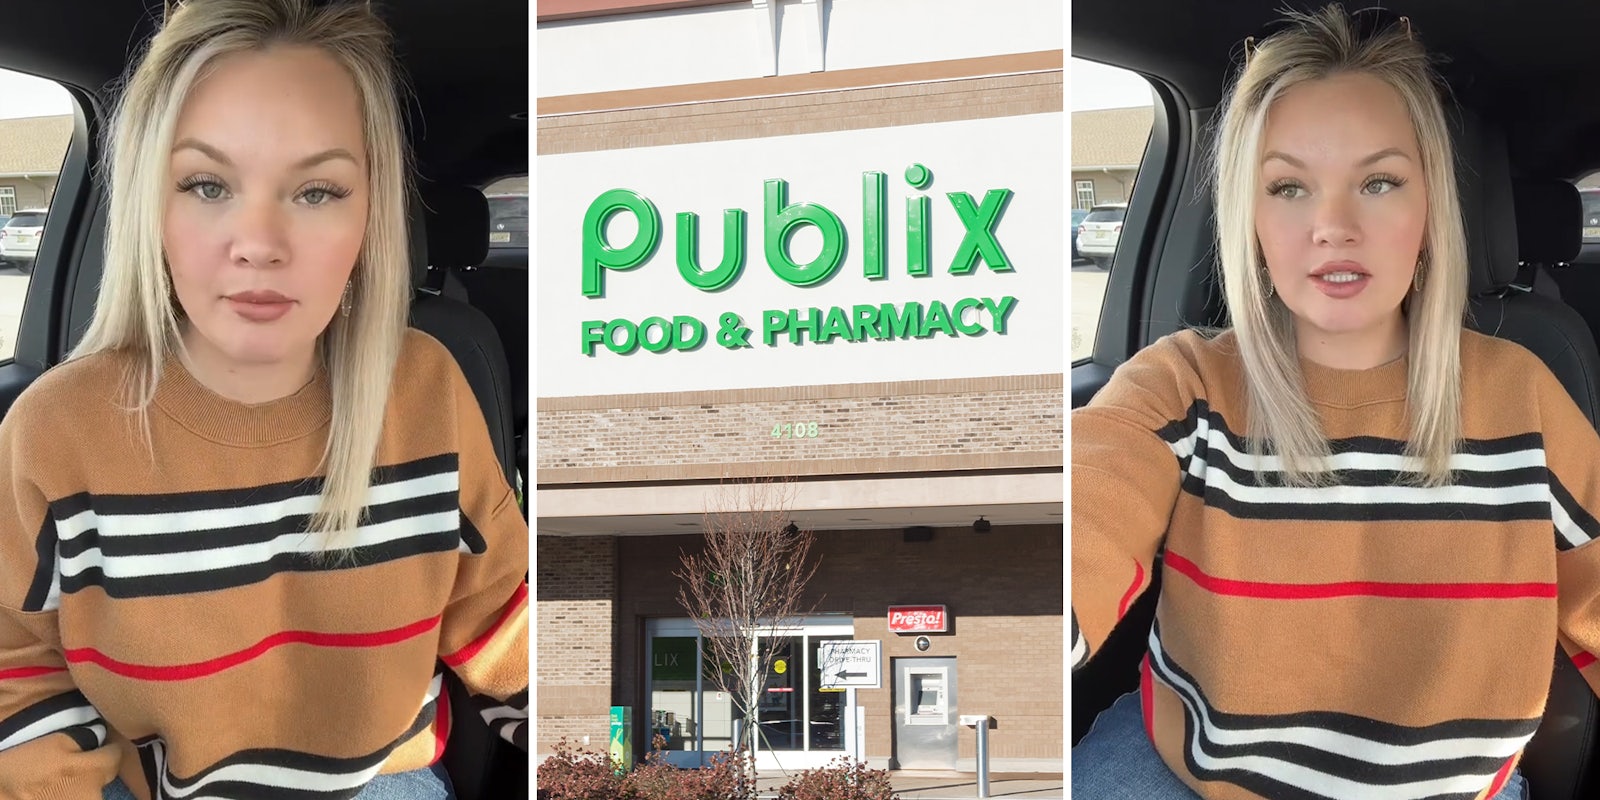 Grocery shopper can't believe how much she paid for just milk, chicken, frozen vegetables, and bread at Publix